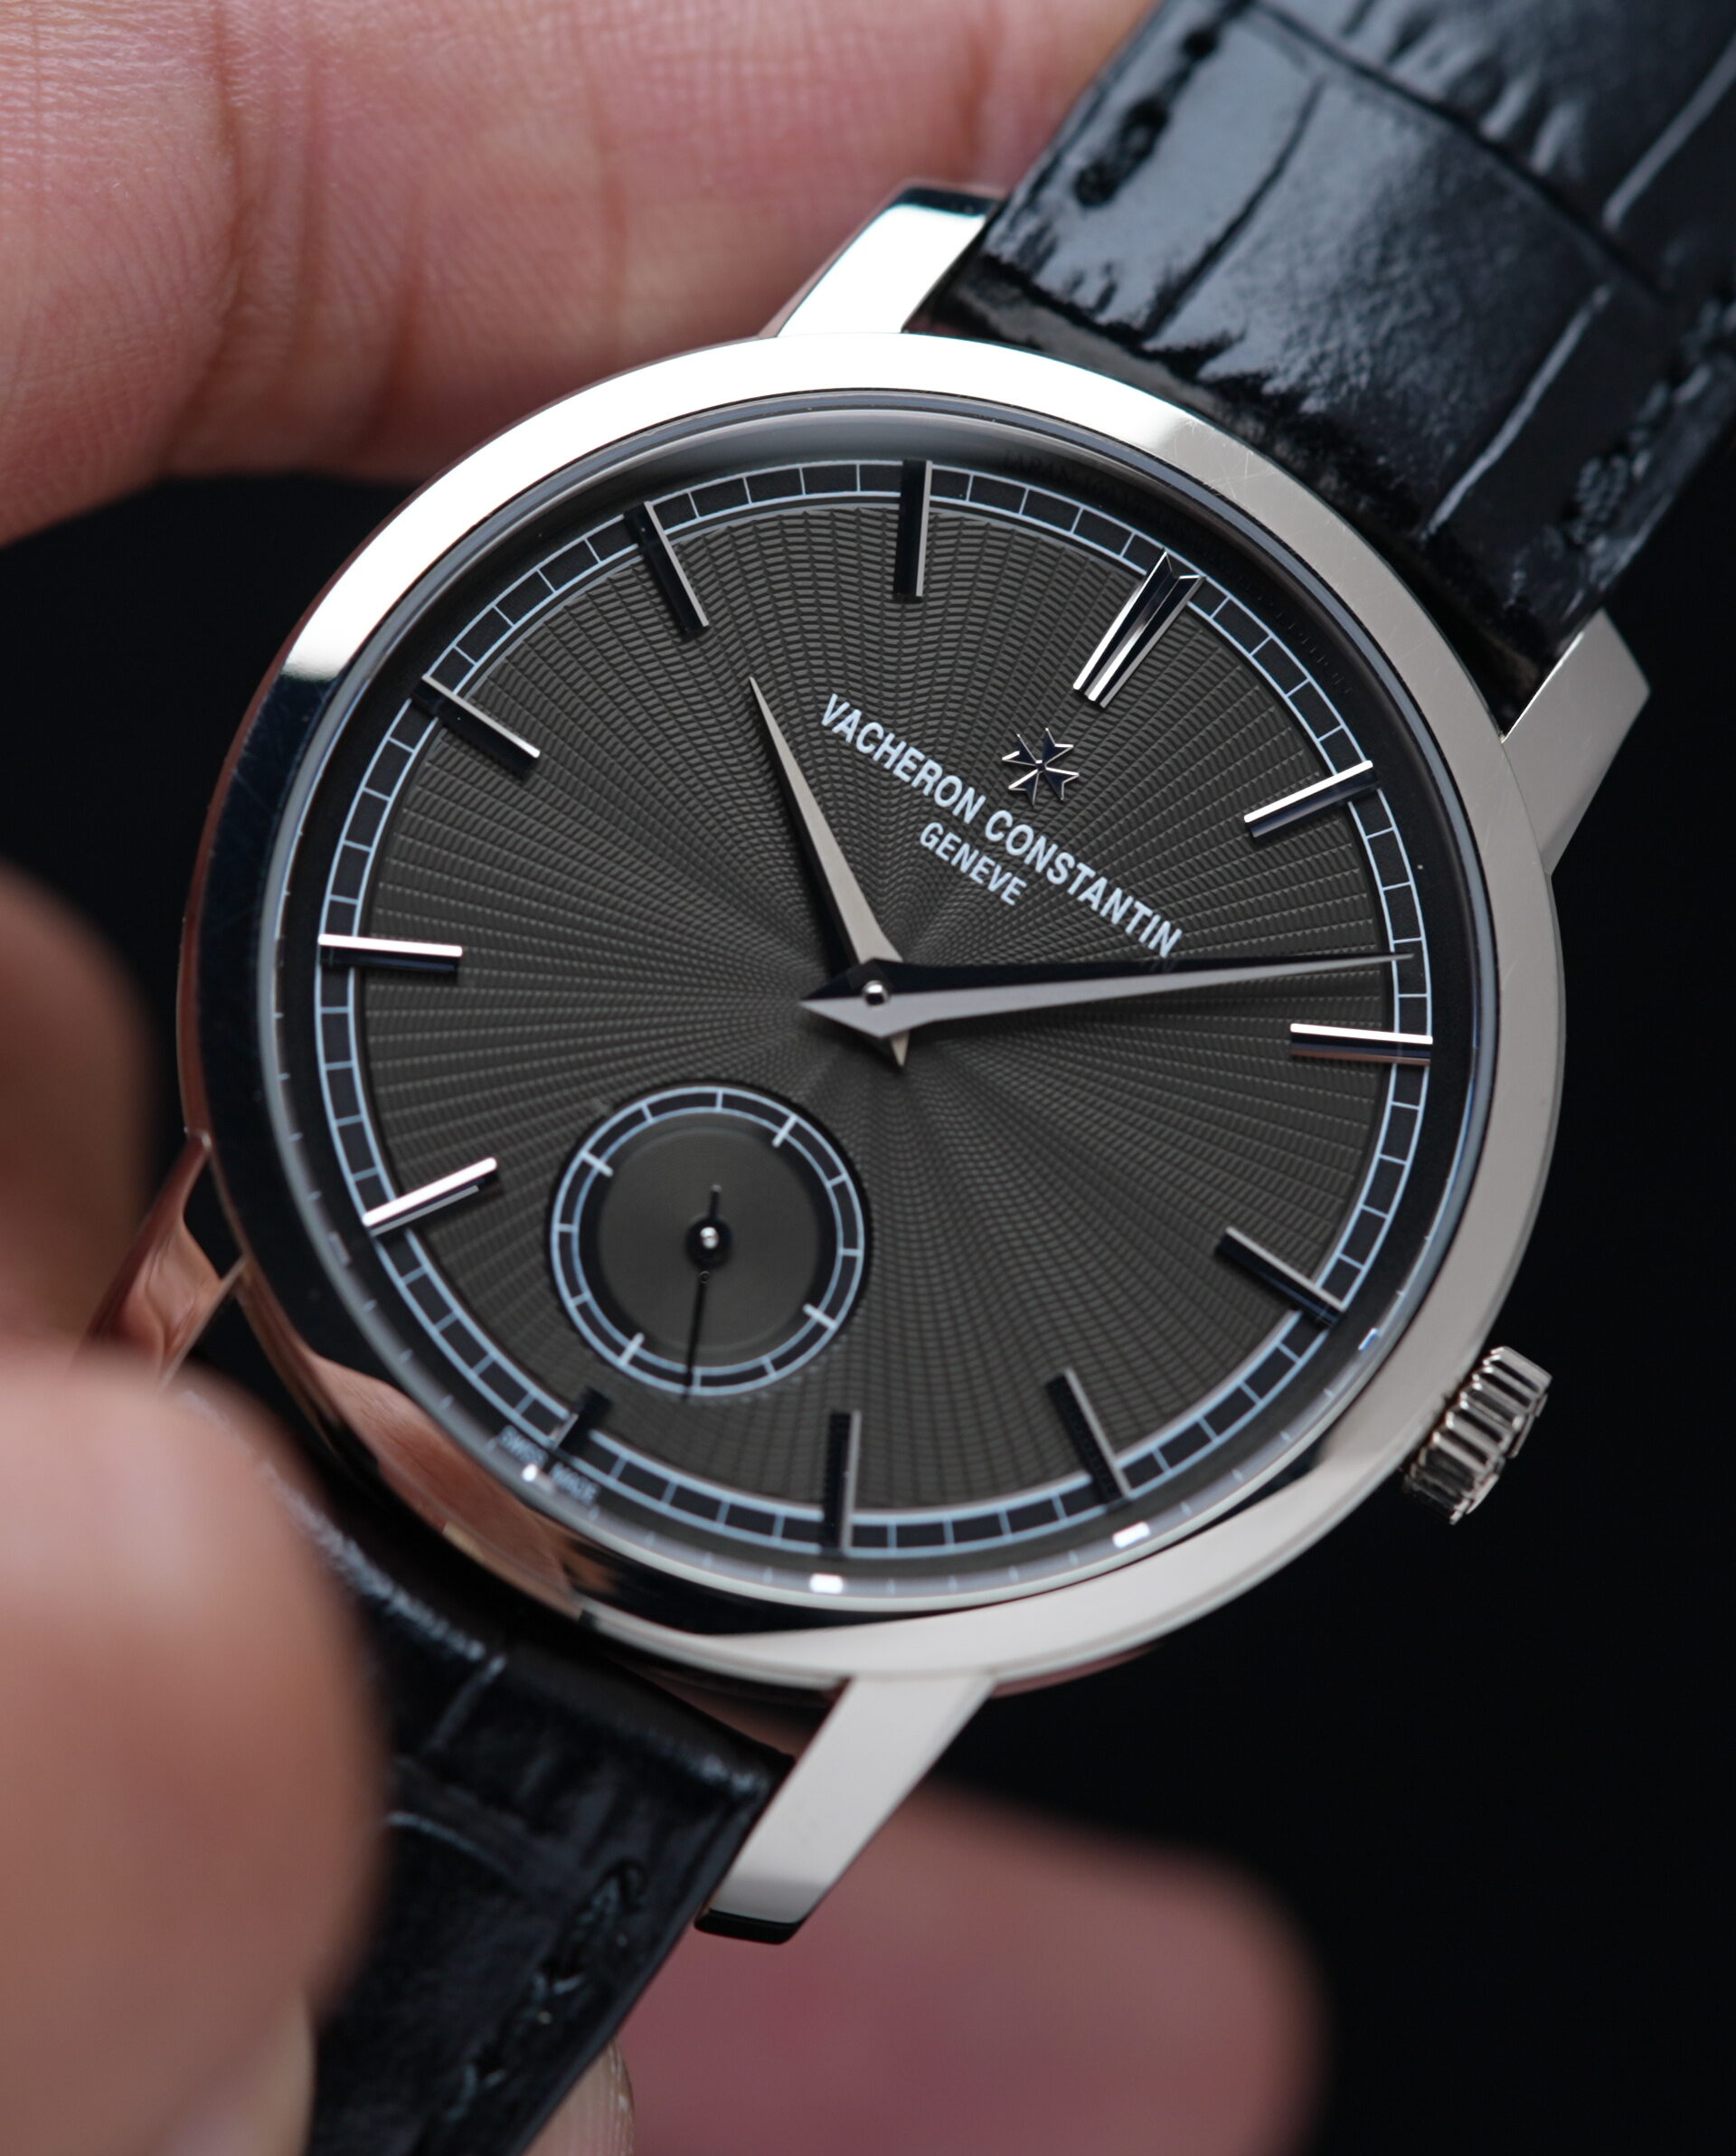 Vacheron Constantin Patrimony Traditional Japan 100th Anniversary watch displayed in hand.